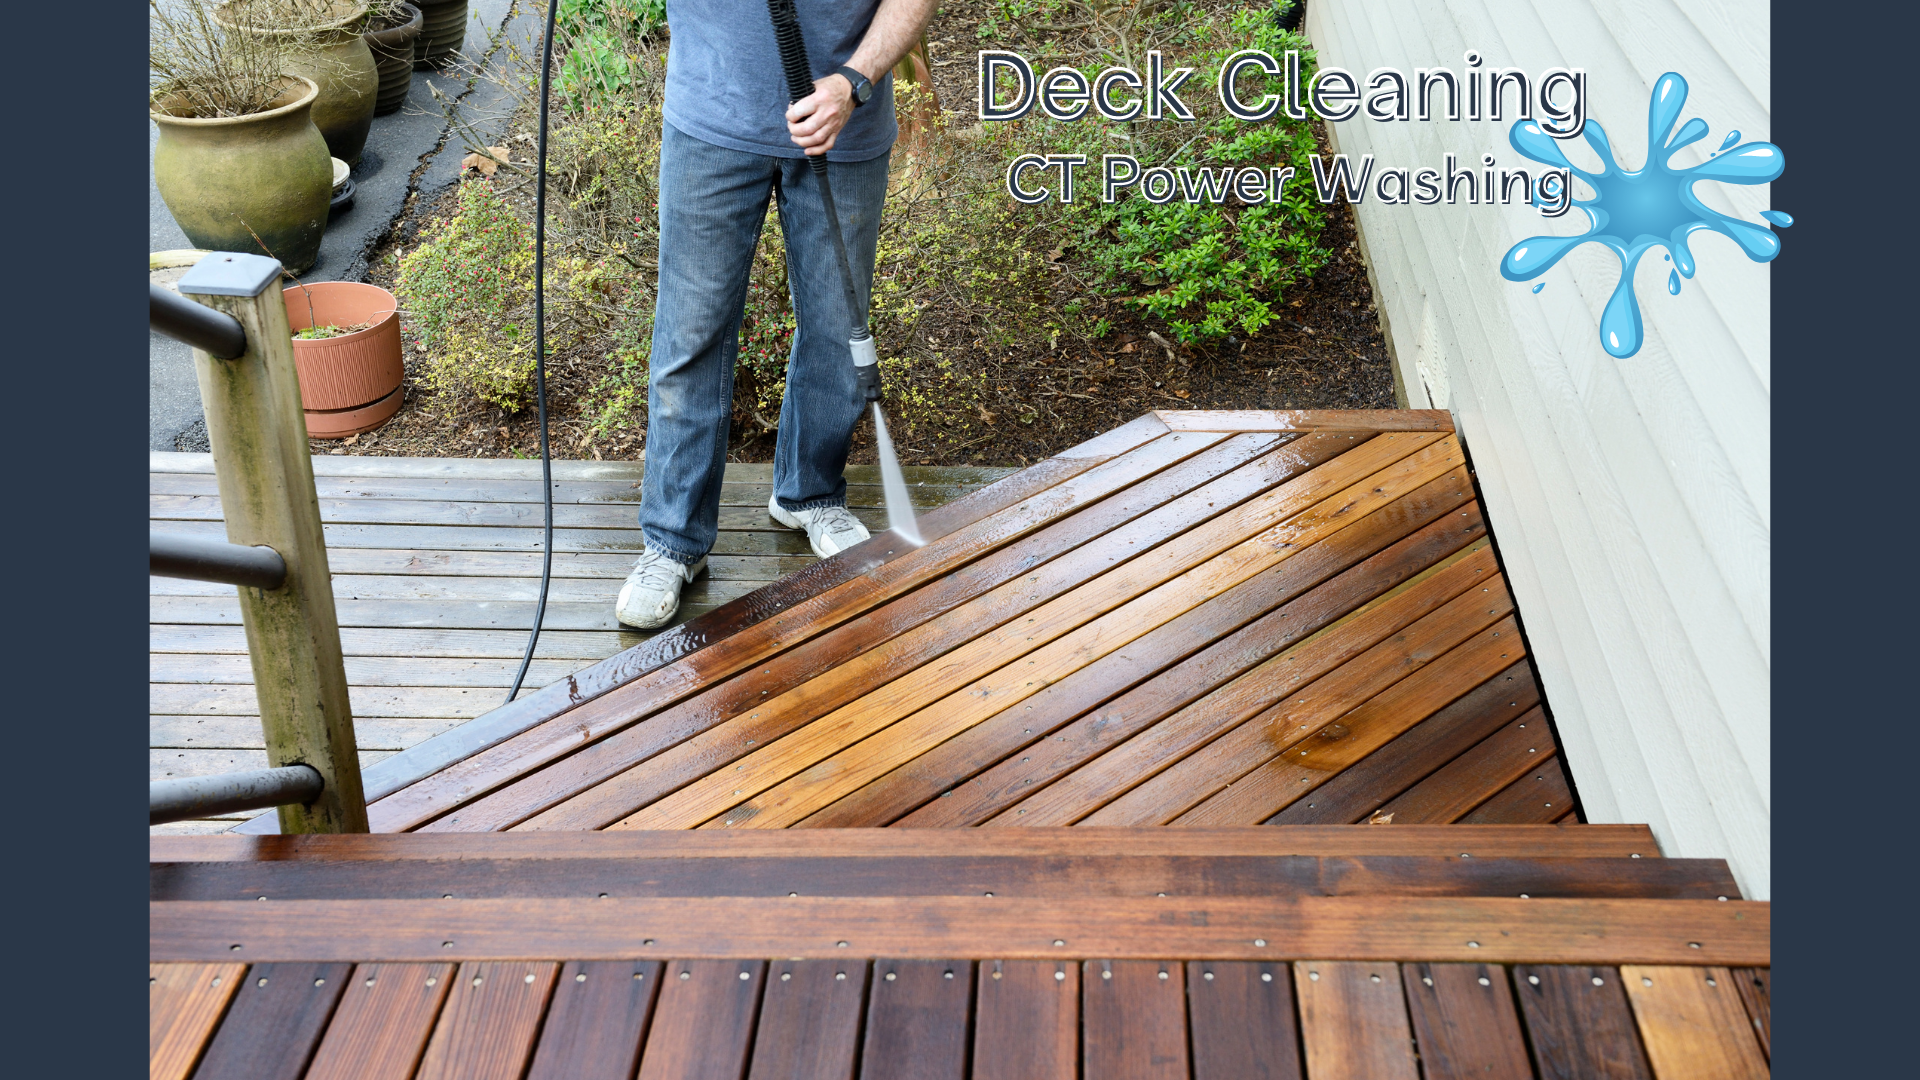 Deck Cleaning Service Connecticut